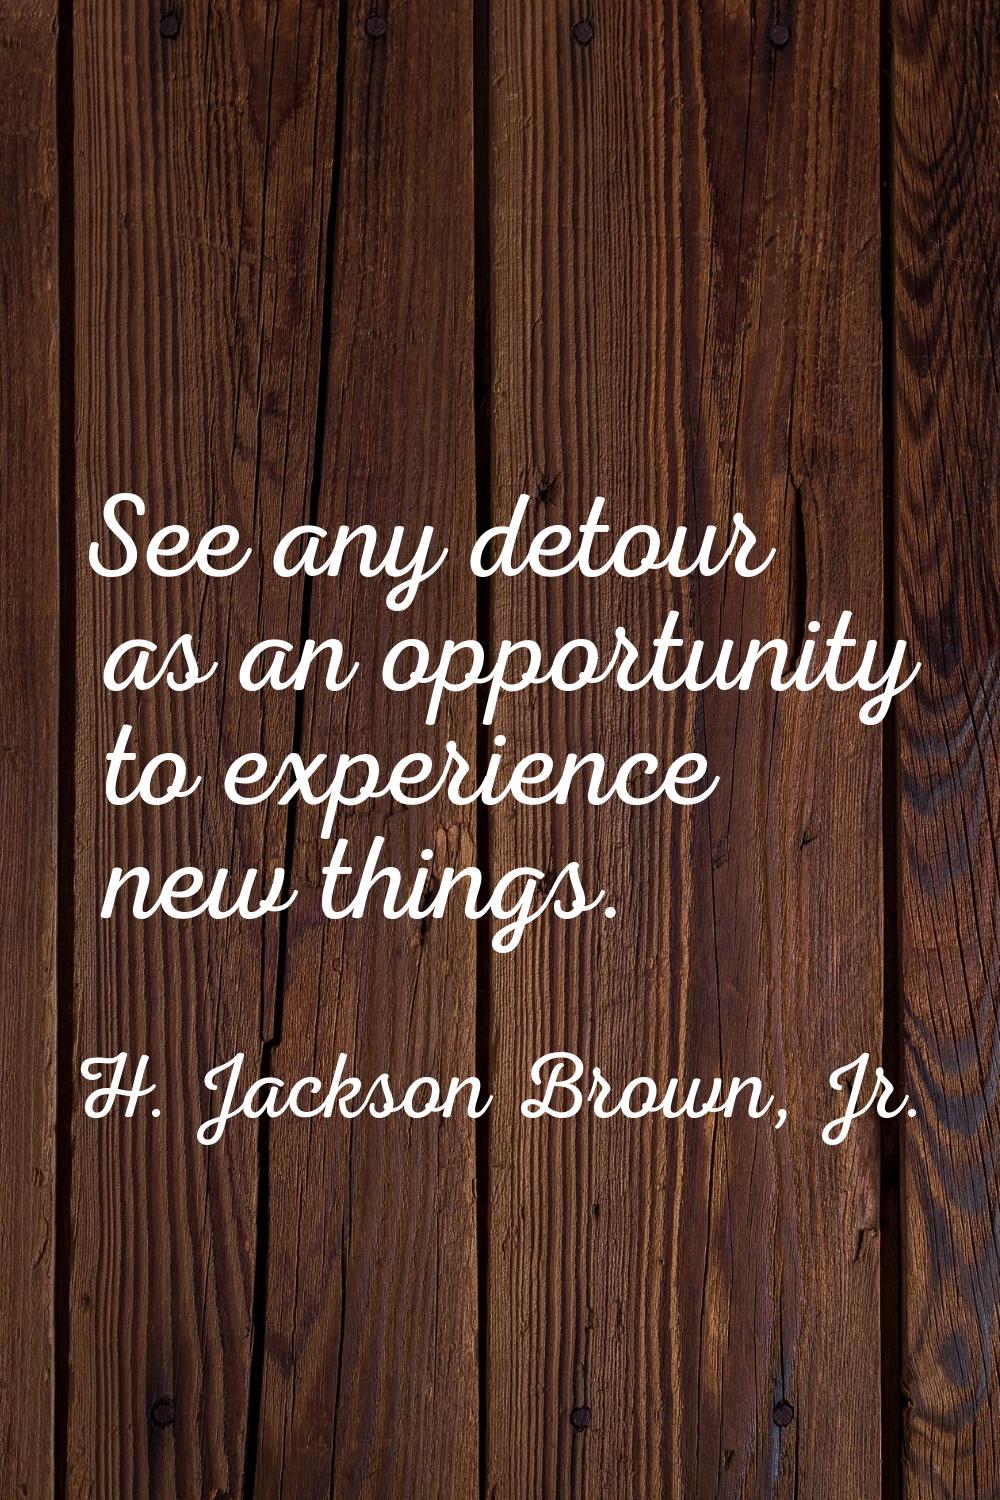 See any detour as an opportunity to experience new things.